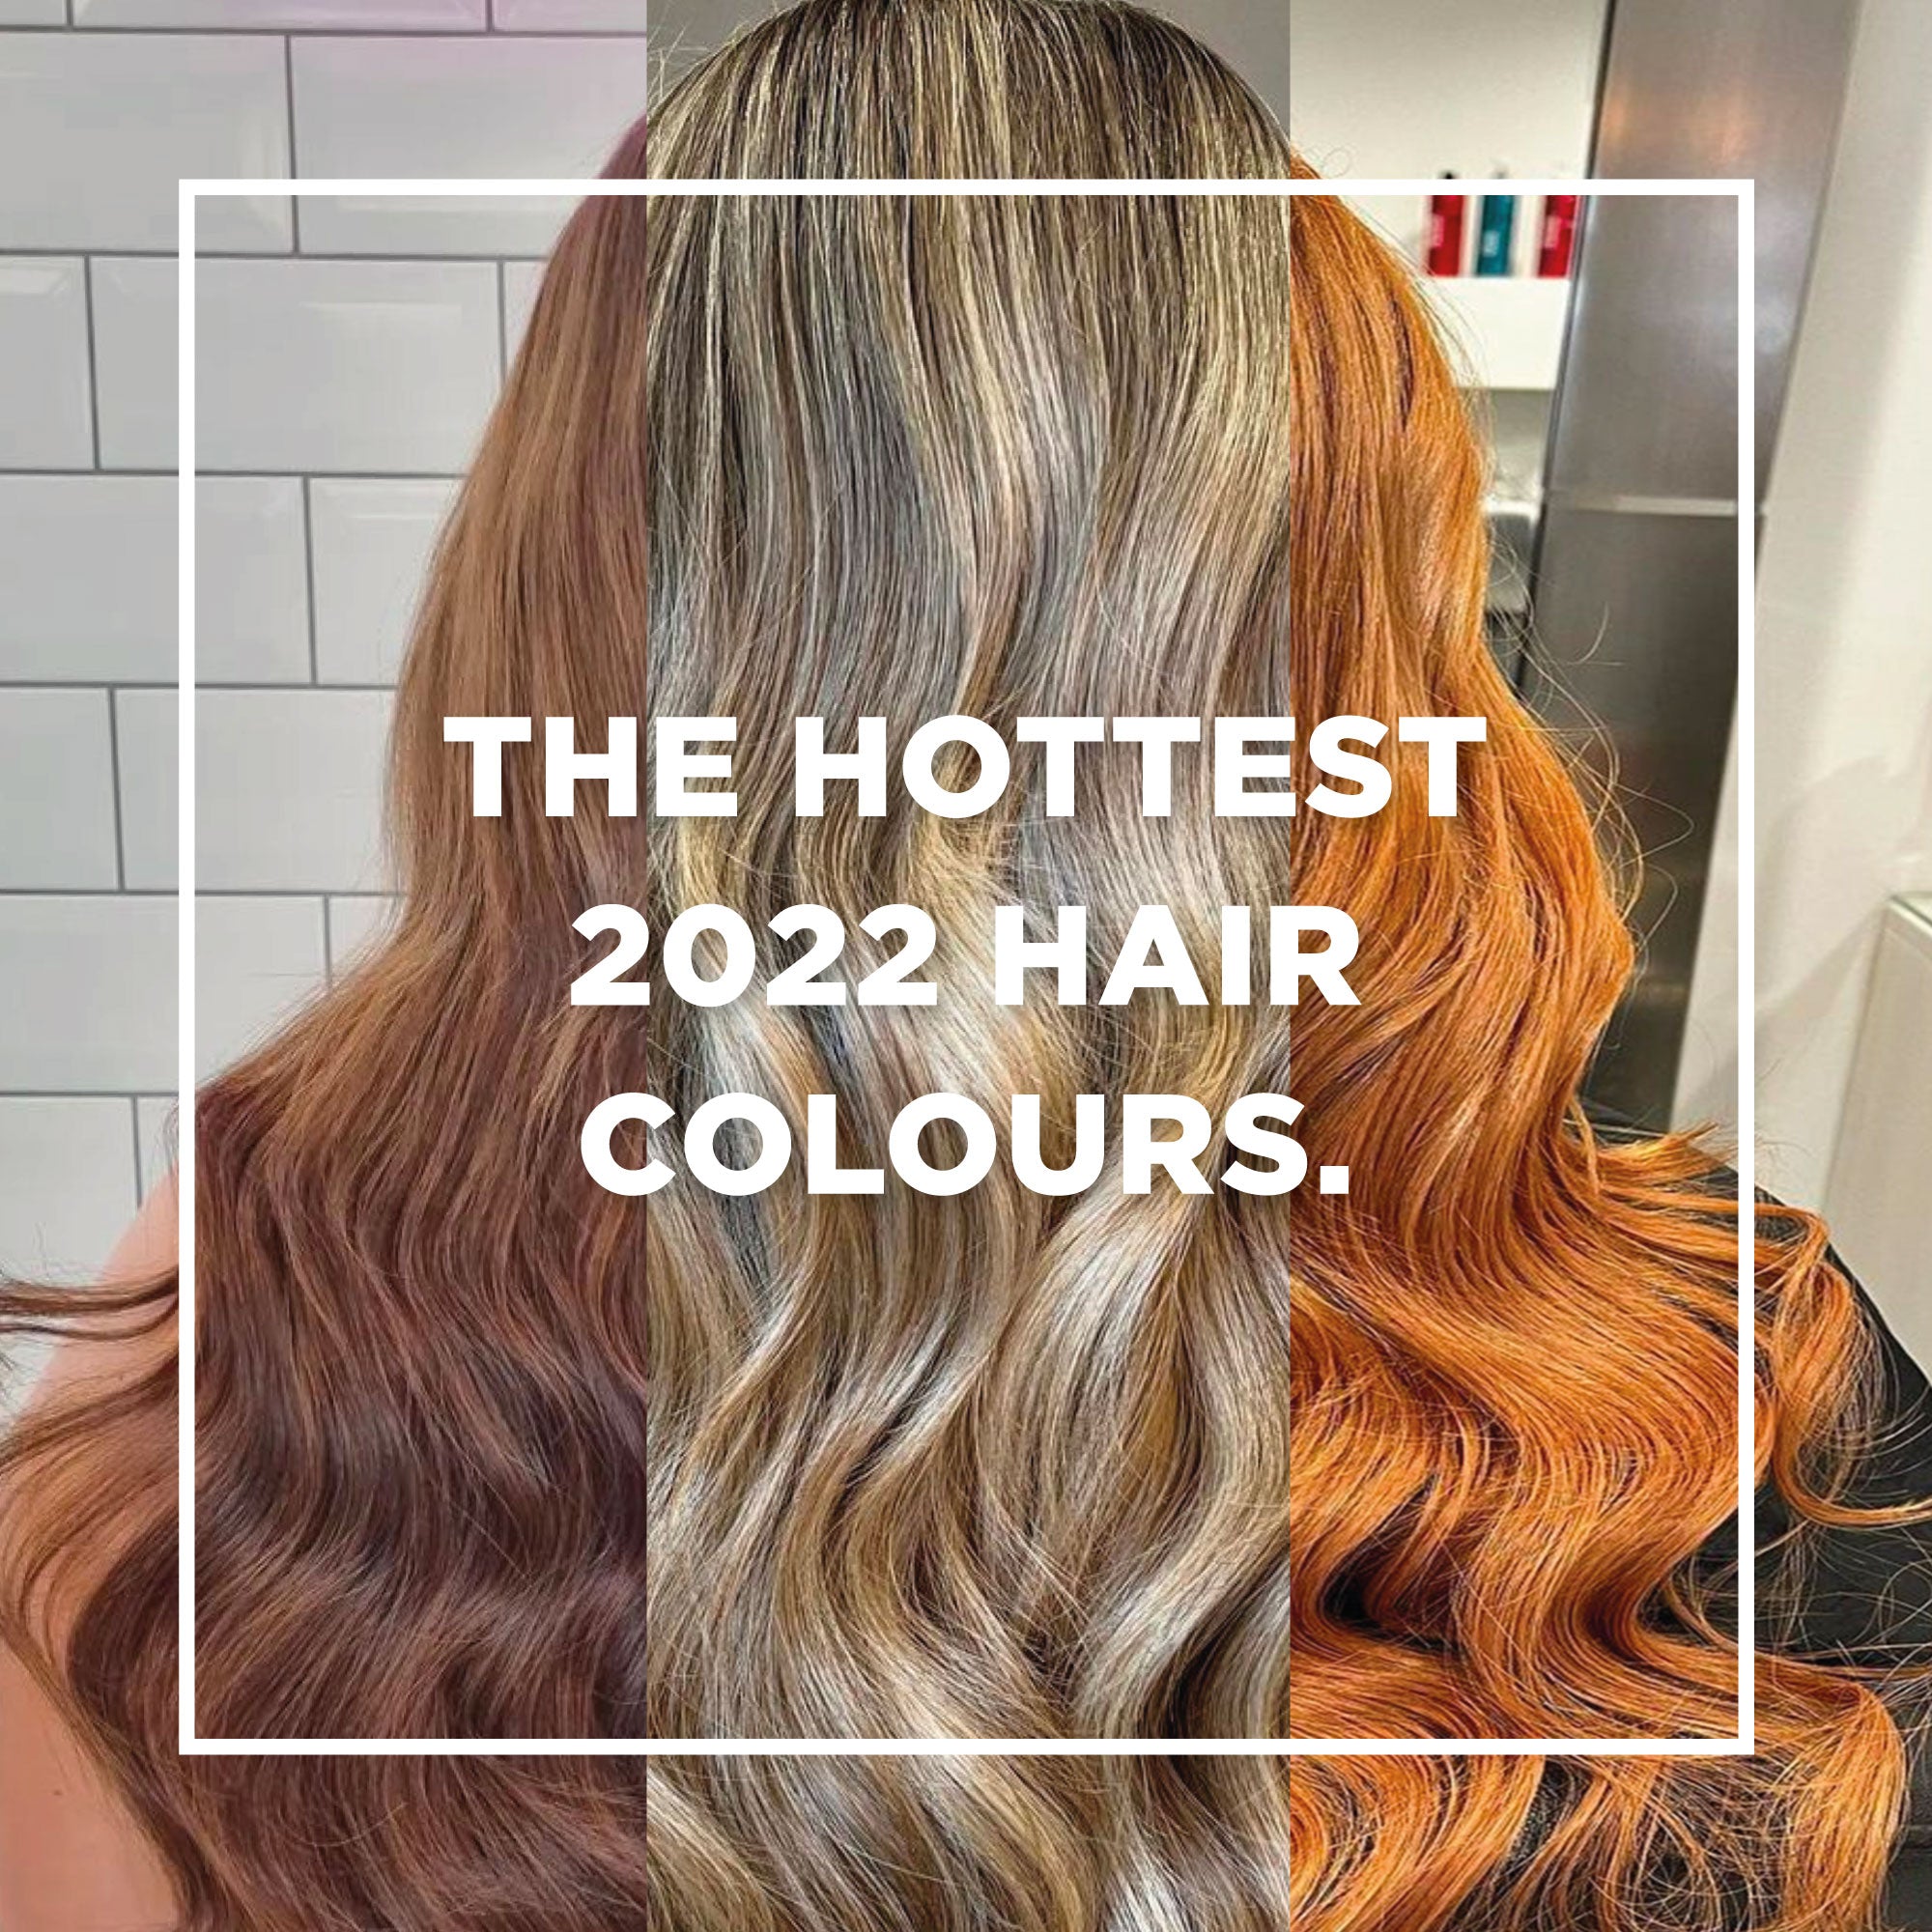 The Hottest 2022 Hair Colours